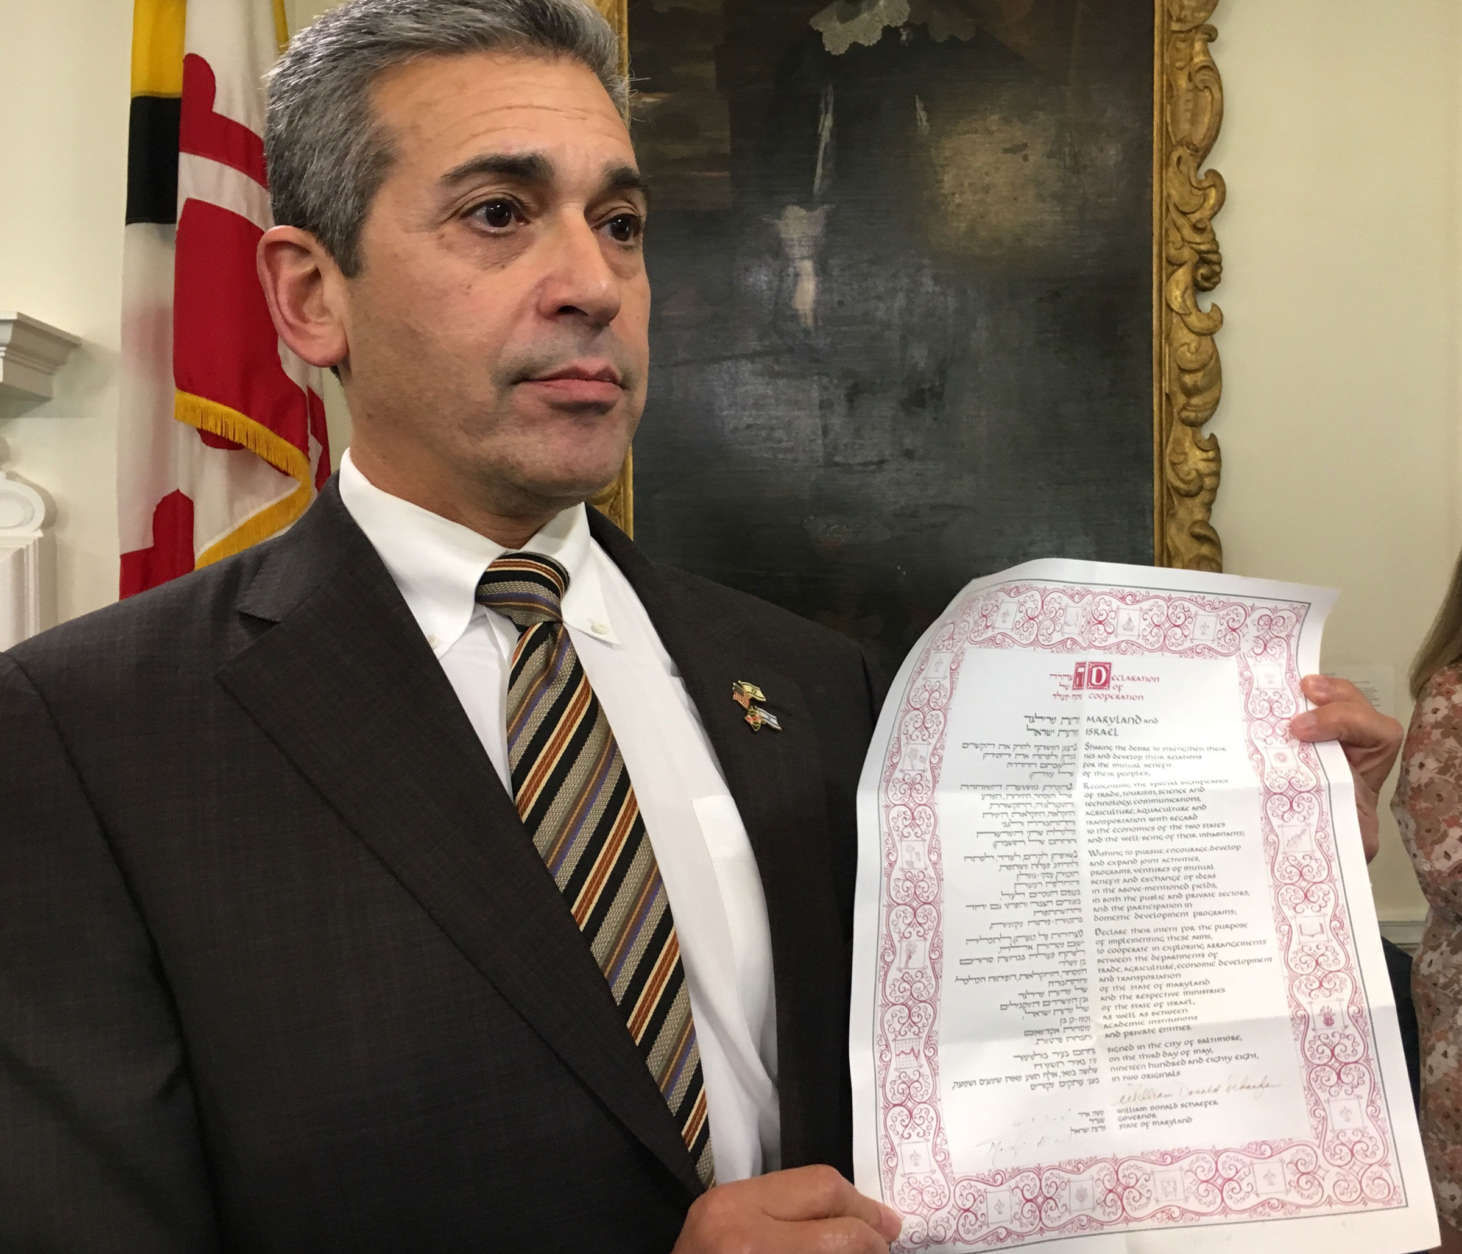 Del. Ben Kramer with a copy of the 1988 Declaration of Cooperation between Israel and Maryland. (WTOP/Kate Ryan)